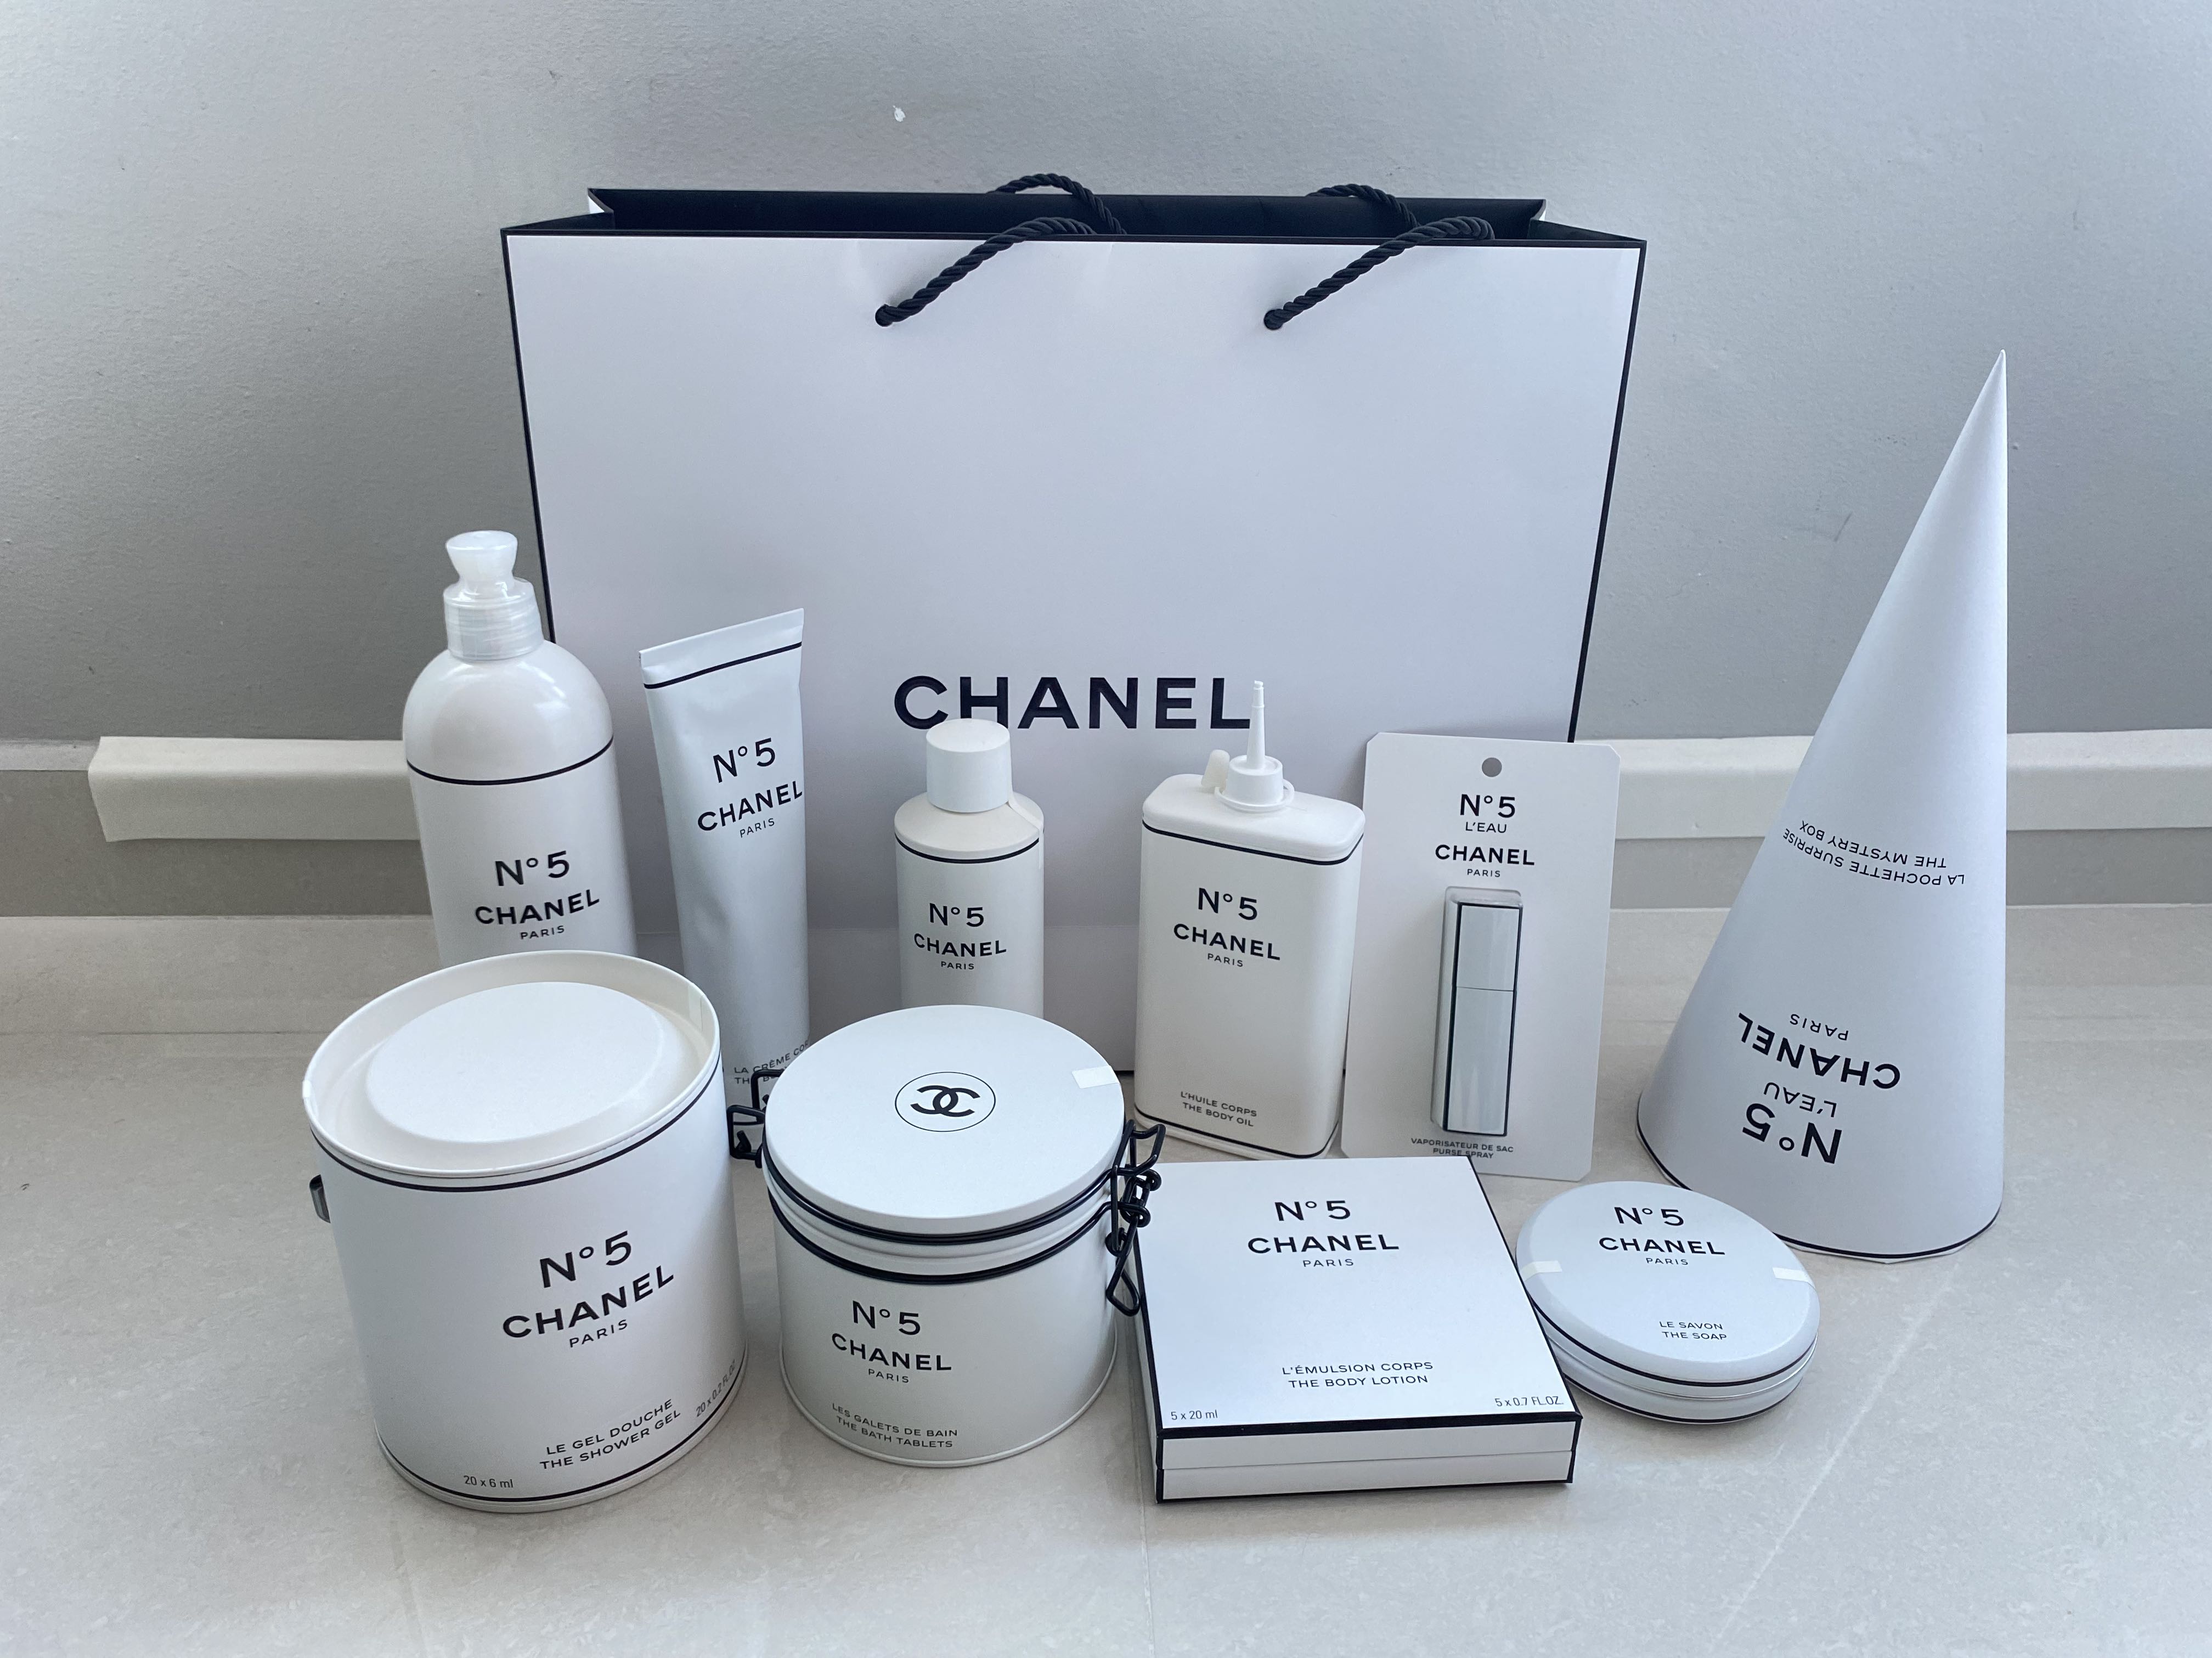 Chanel No 5 Factory items, Beauty & Personal Care, Bath & Body